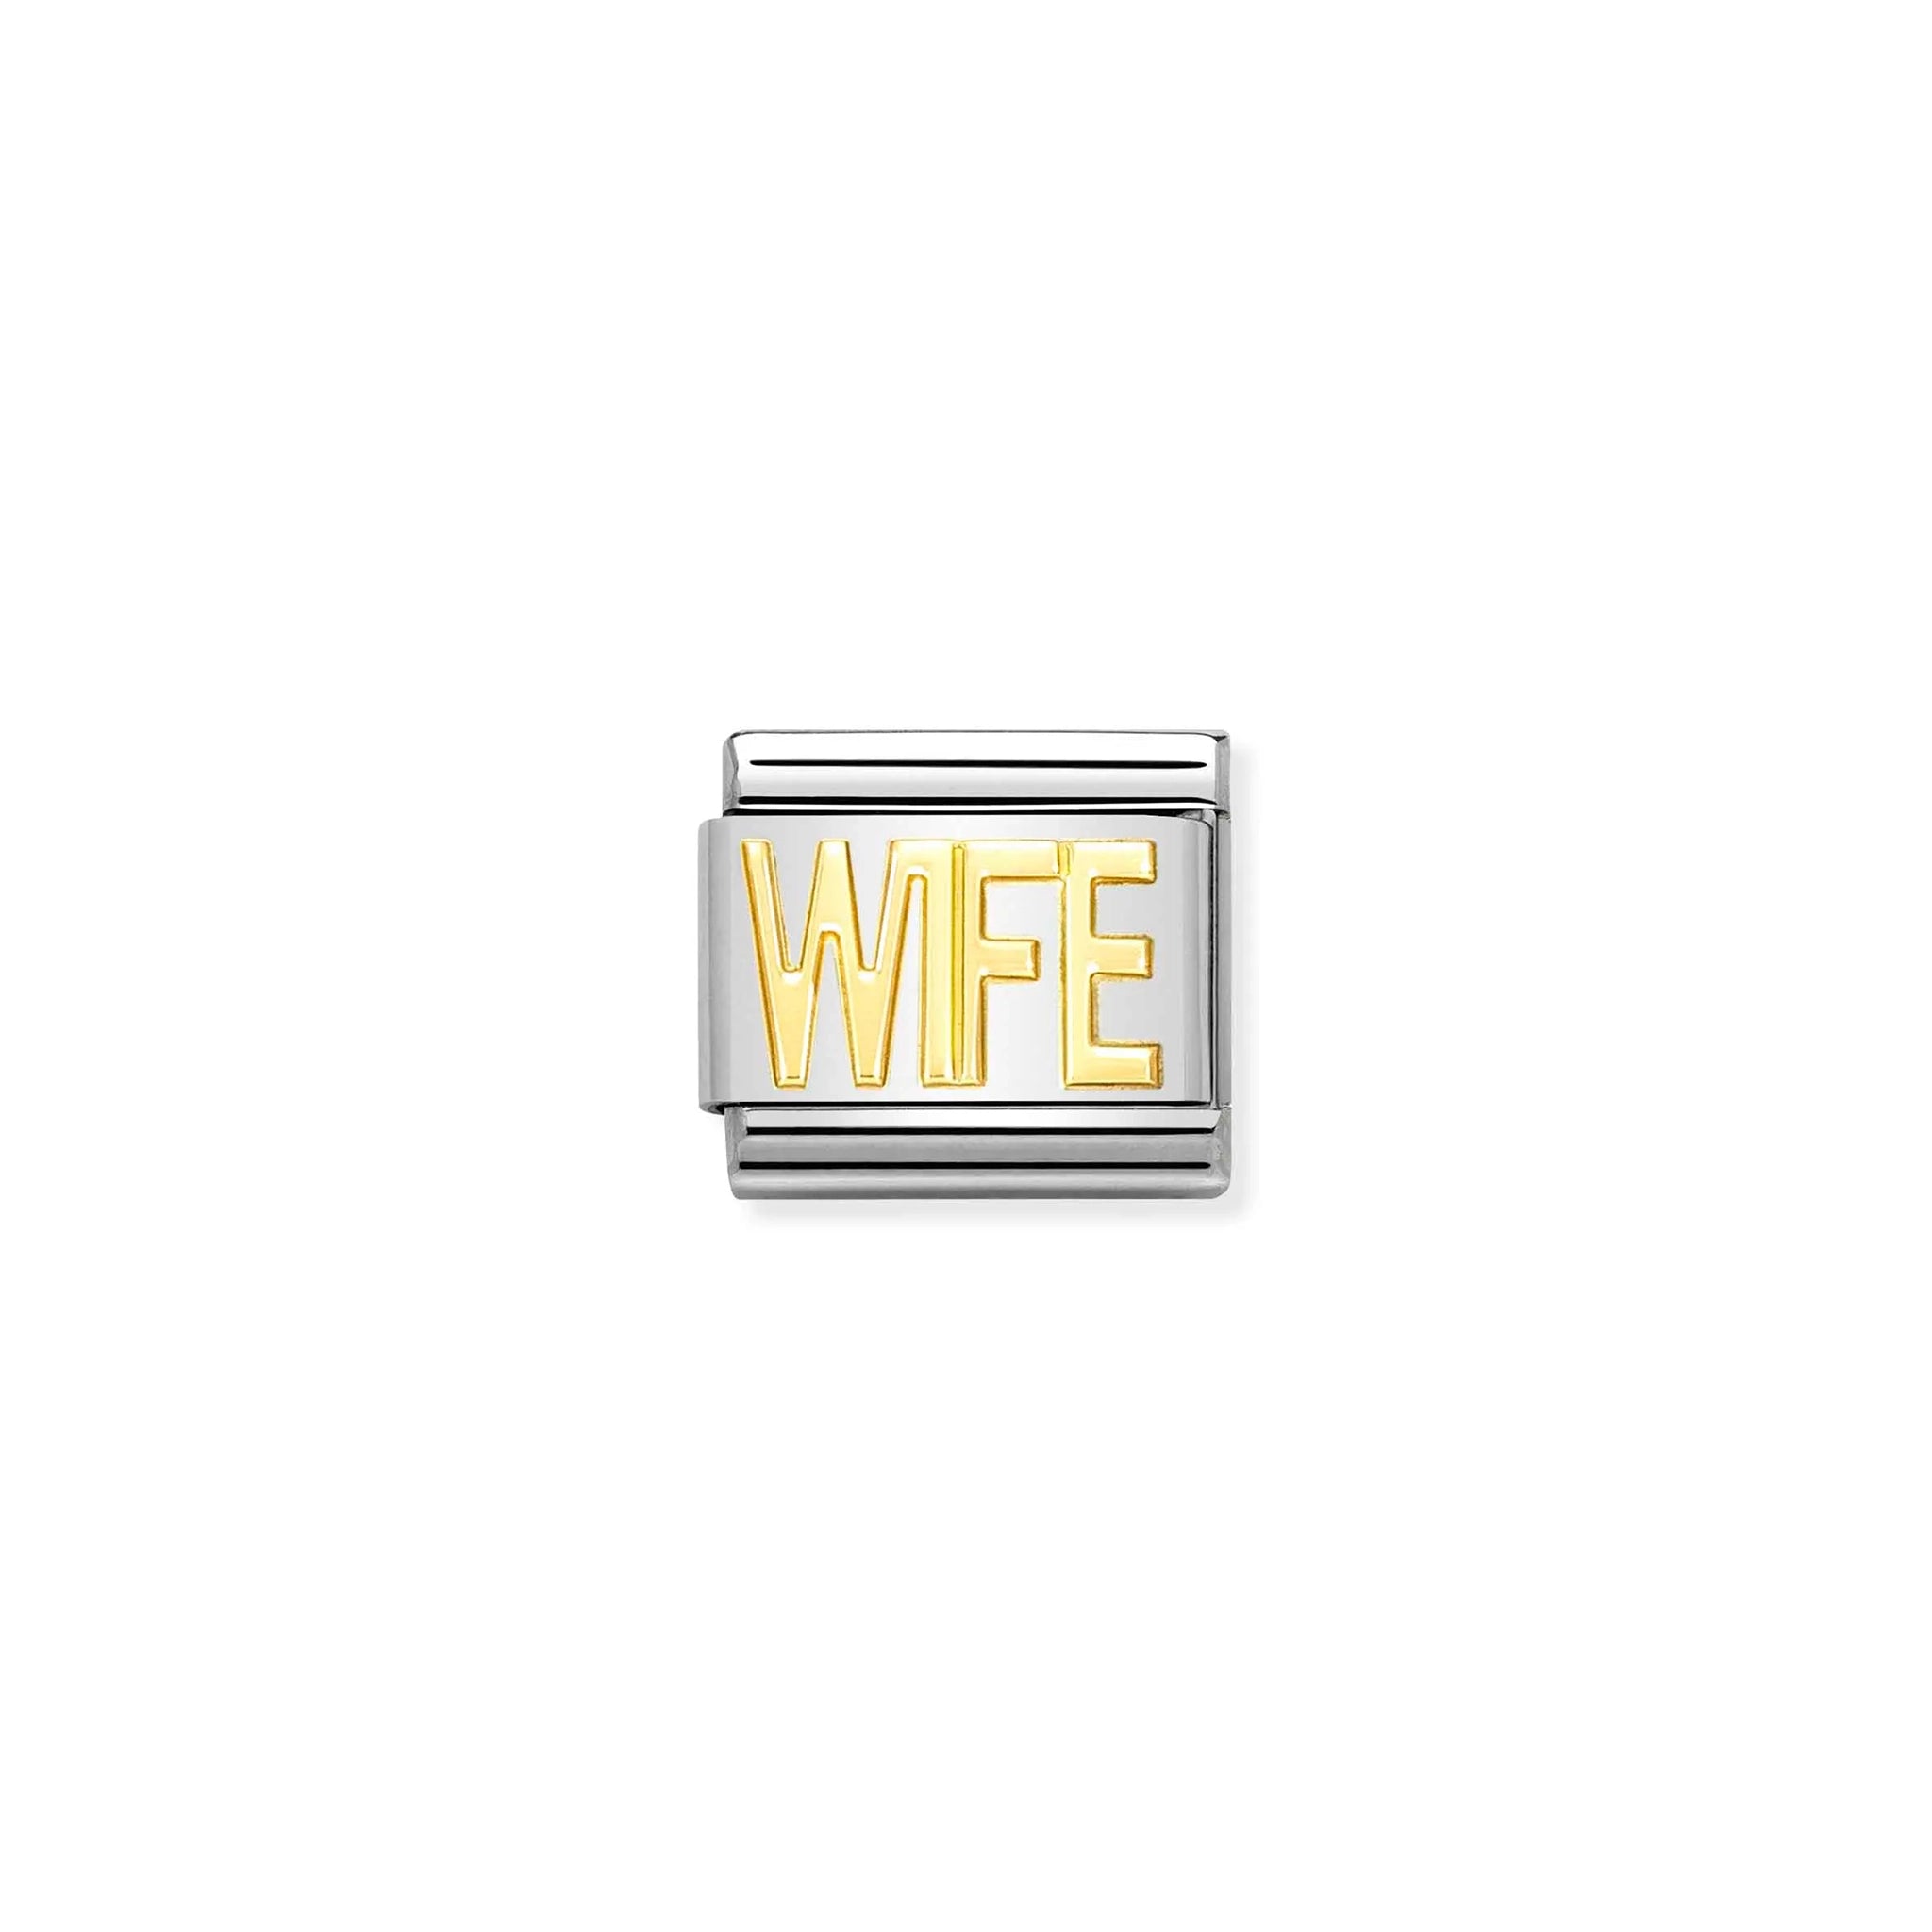 A Nomination charm featuring the word 'WIFE' in gold capital letters